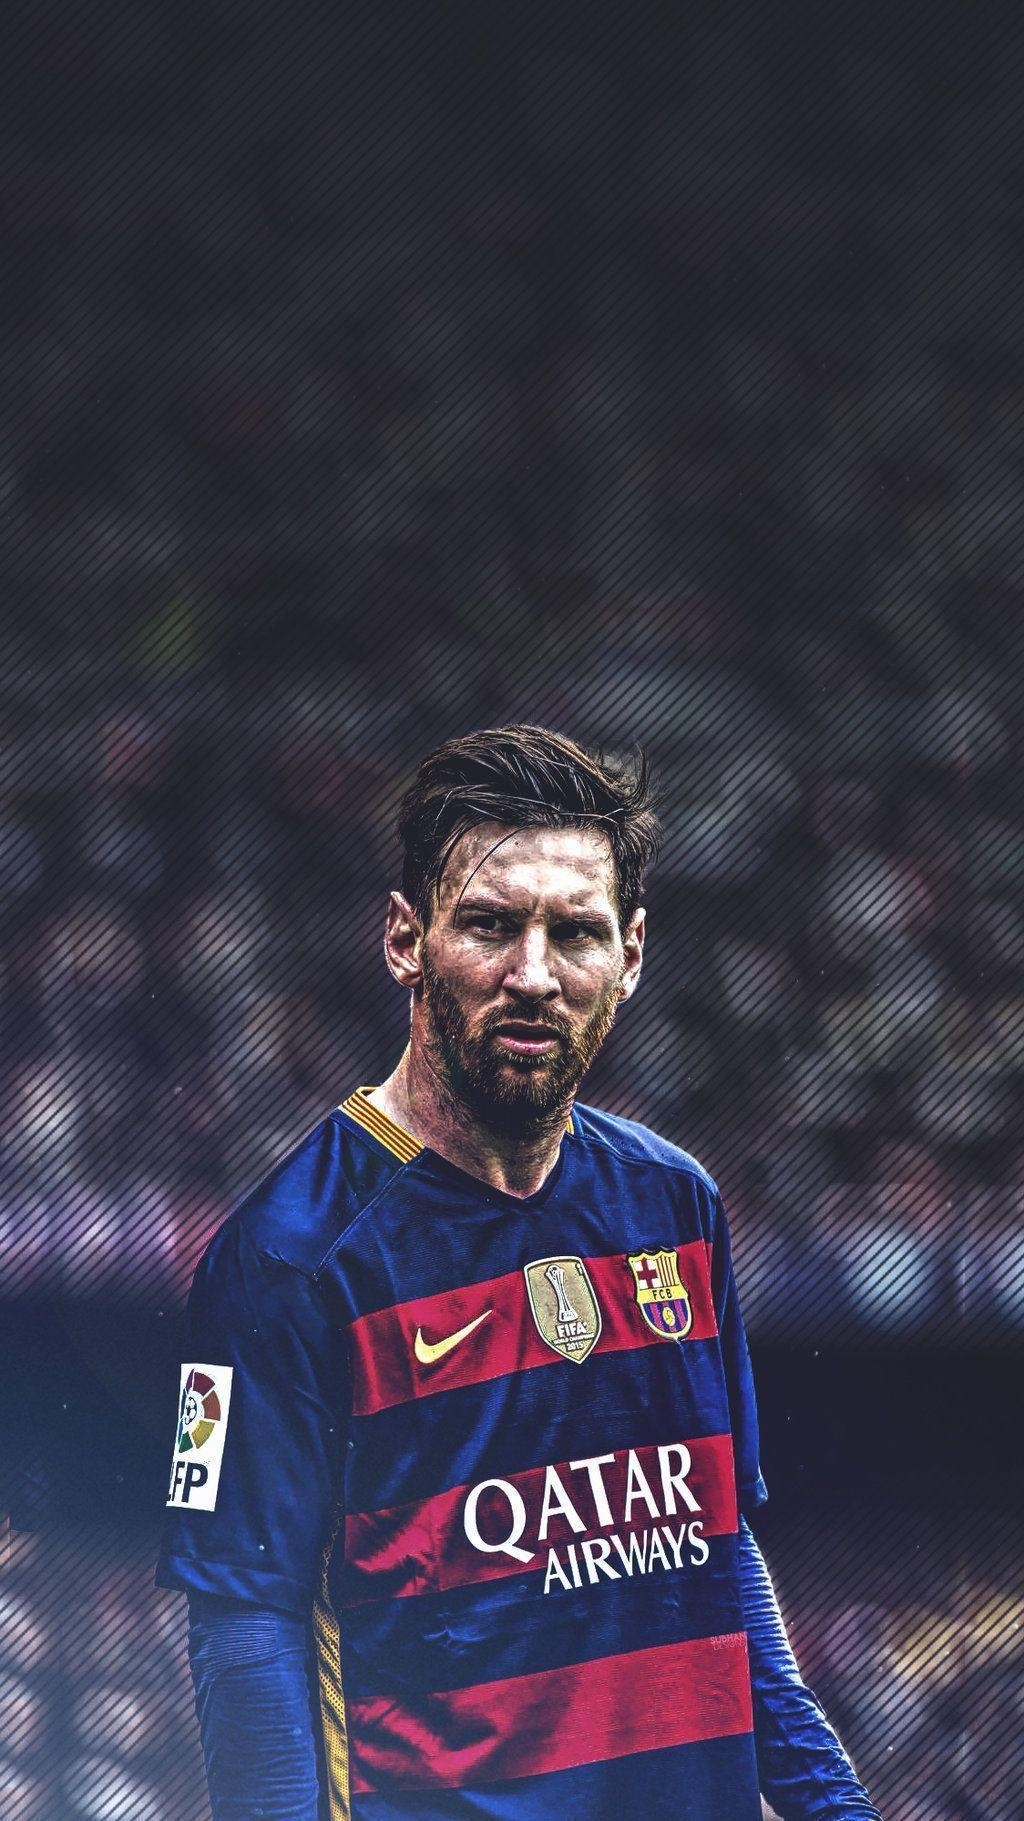 10 Best Lionel Messi Iphone Wallpaper FULL HD 1920×1080 For PC Background